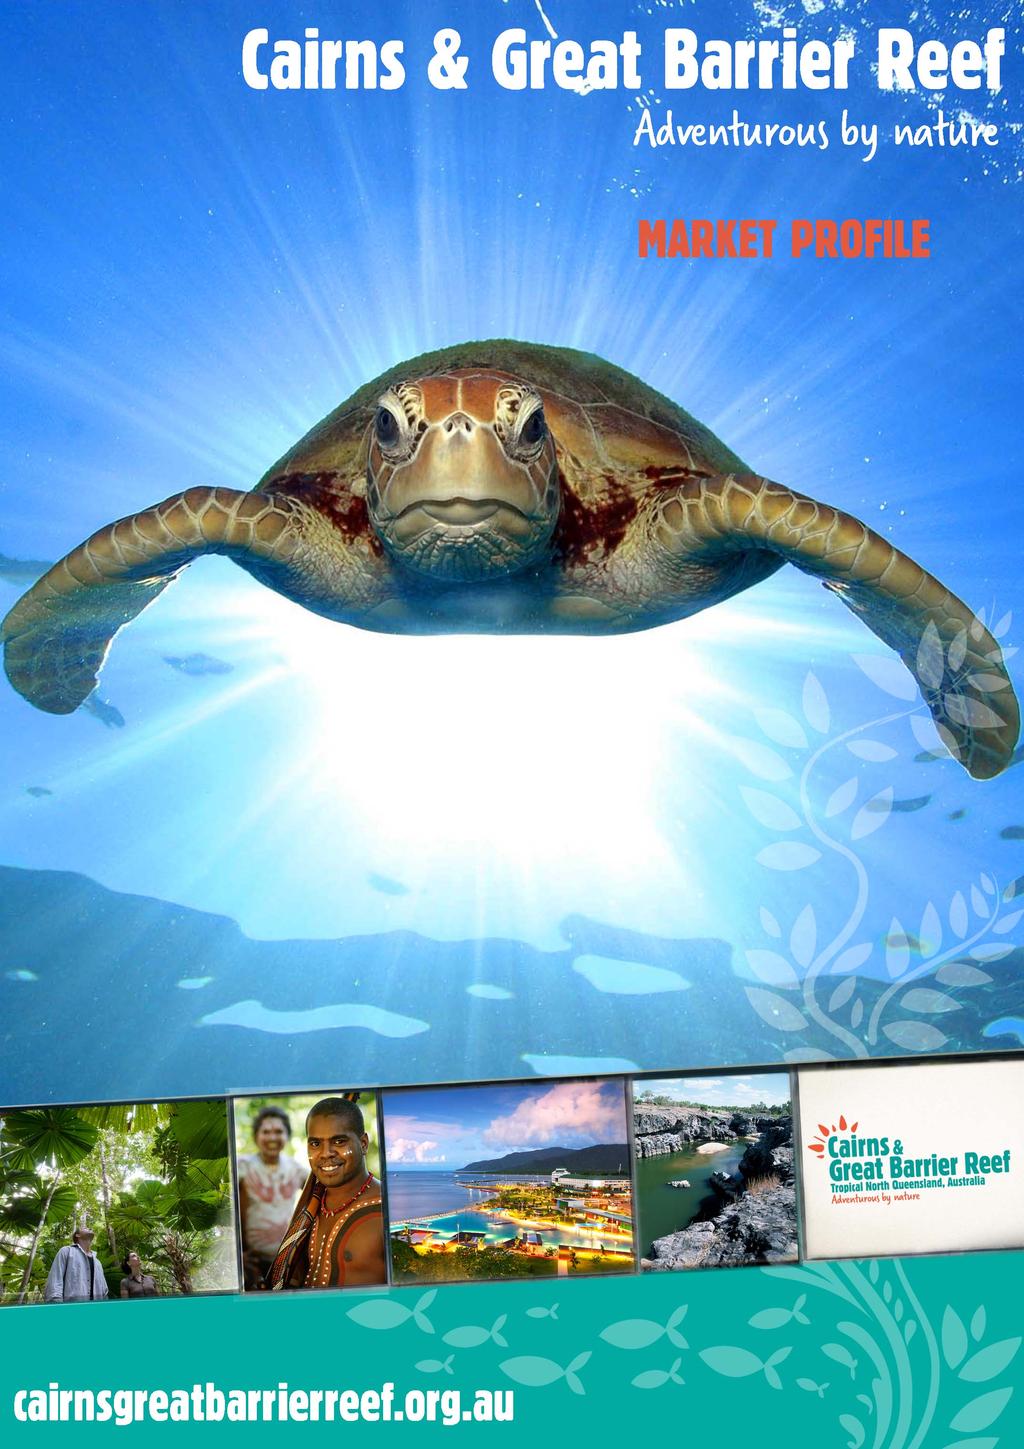 Cairns & Great Barrier Reef Adventurous by nature Updated on: Friday, 27 September 2013